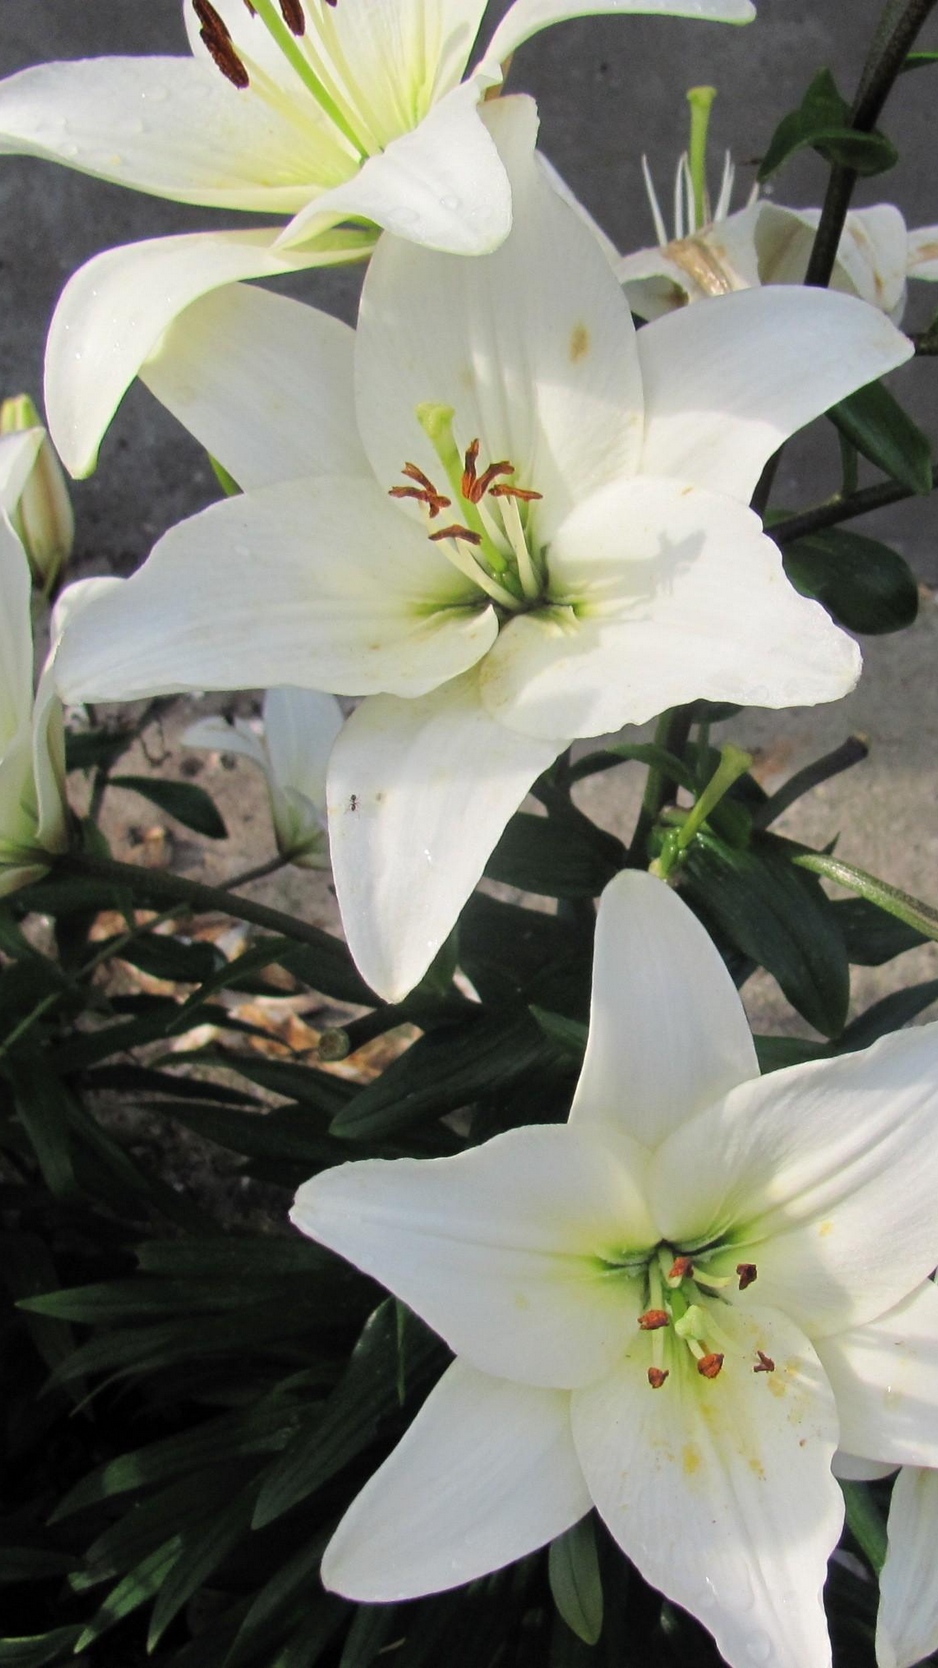 Wallpaper Lily, Flowers, White, Flowerbed, Bud, Green - White Lily Wallpaper Iphone - HD Wallpaper 